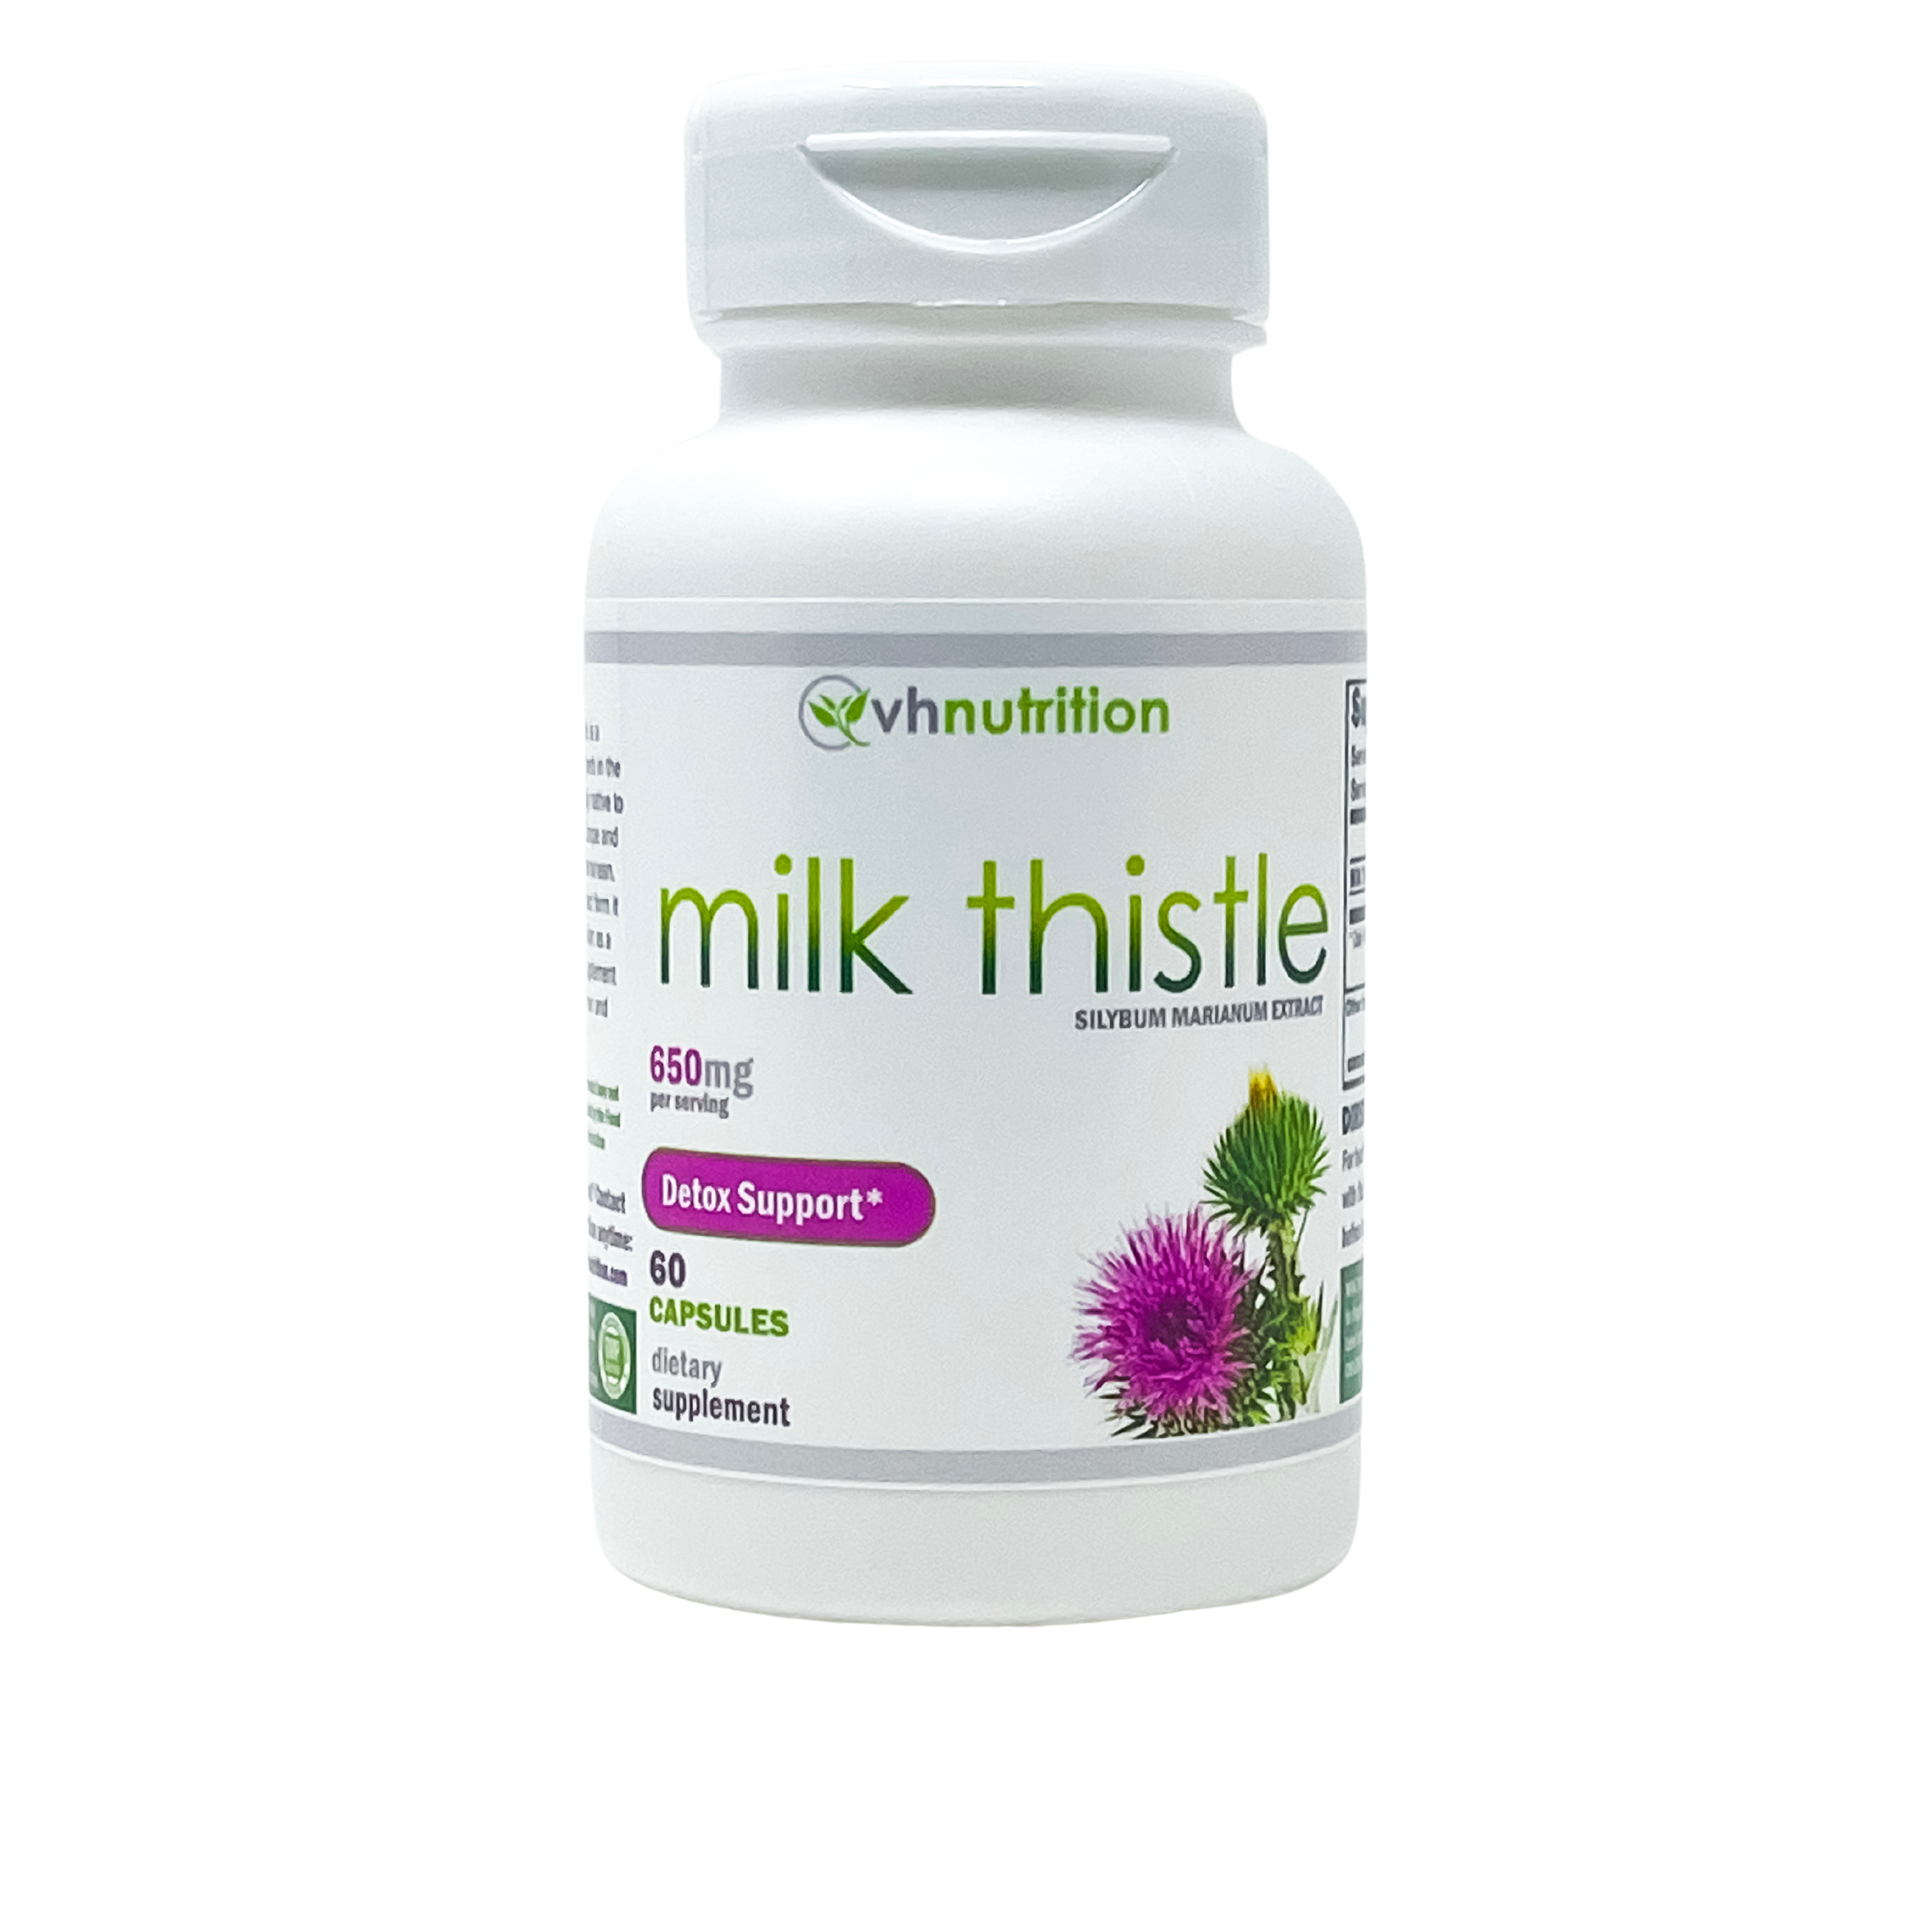 VH Nutrition MILK THISTLE | Silybum Marianum Capsules | Liver Health and Detox Support Supplement for Women & Men* | 650mg per serving 60 Capsules | Standardized Milk Thistle Extract